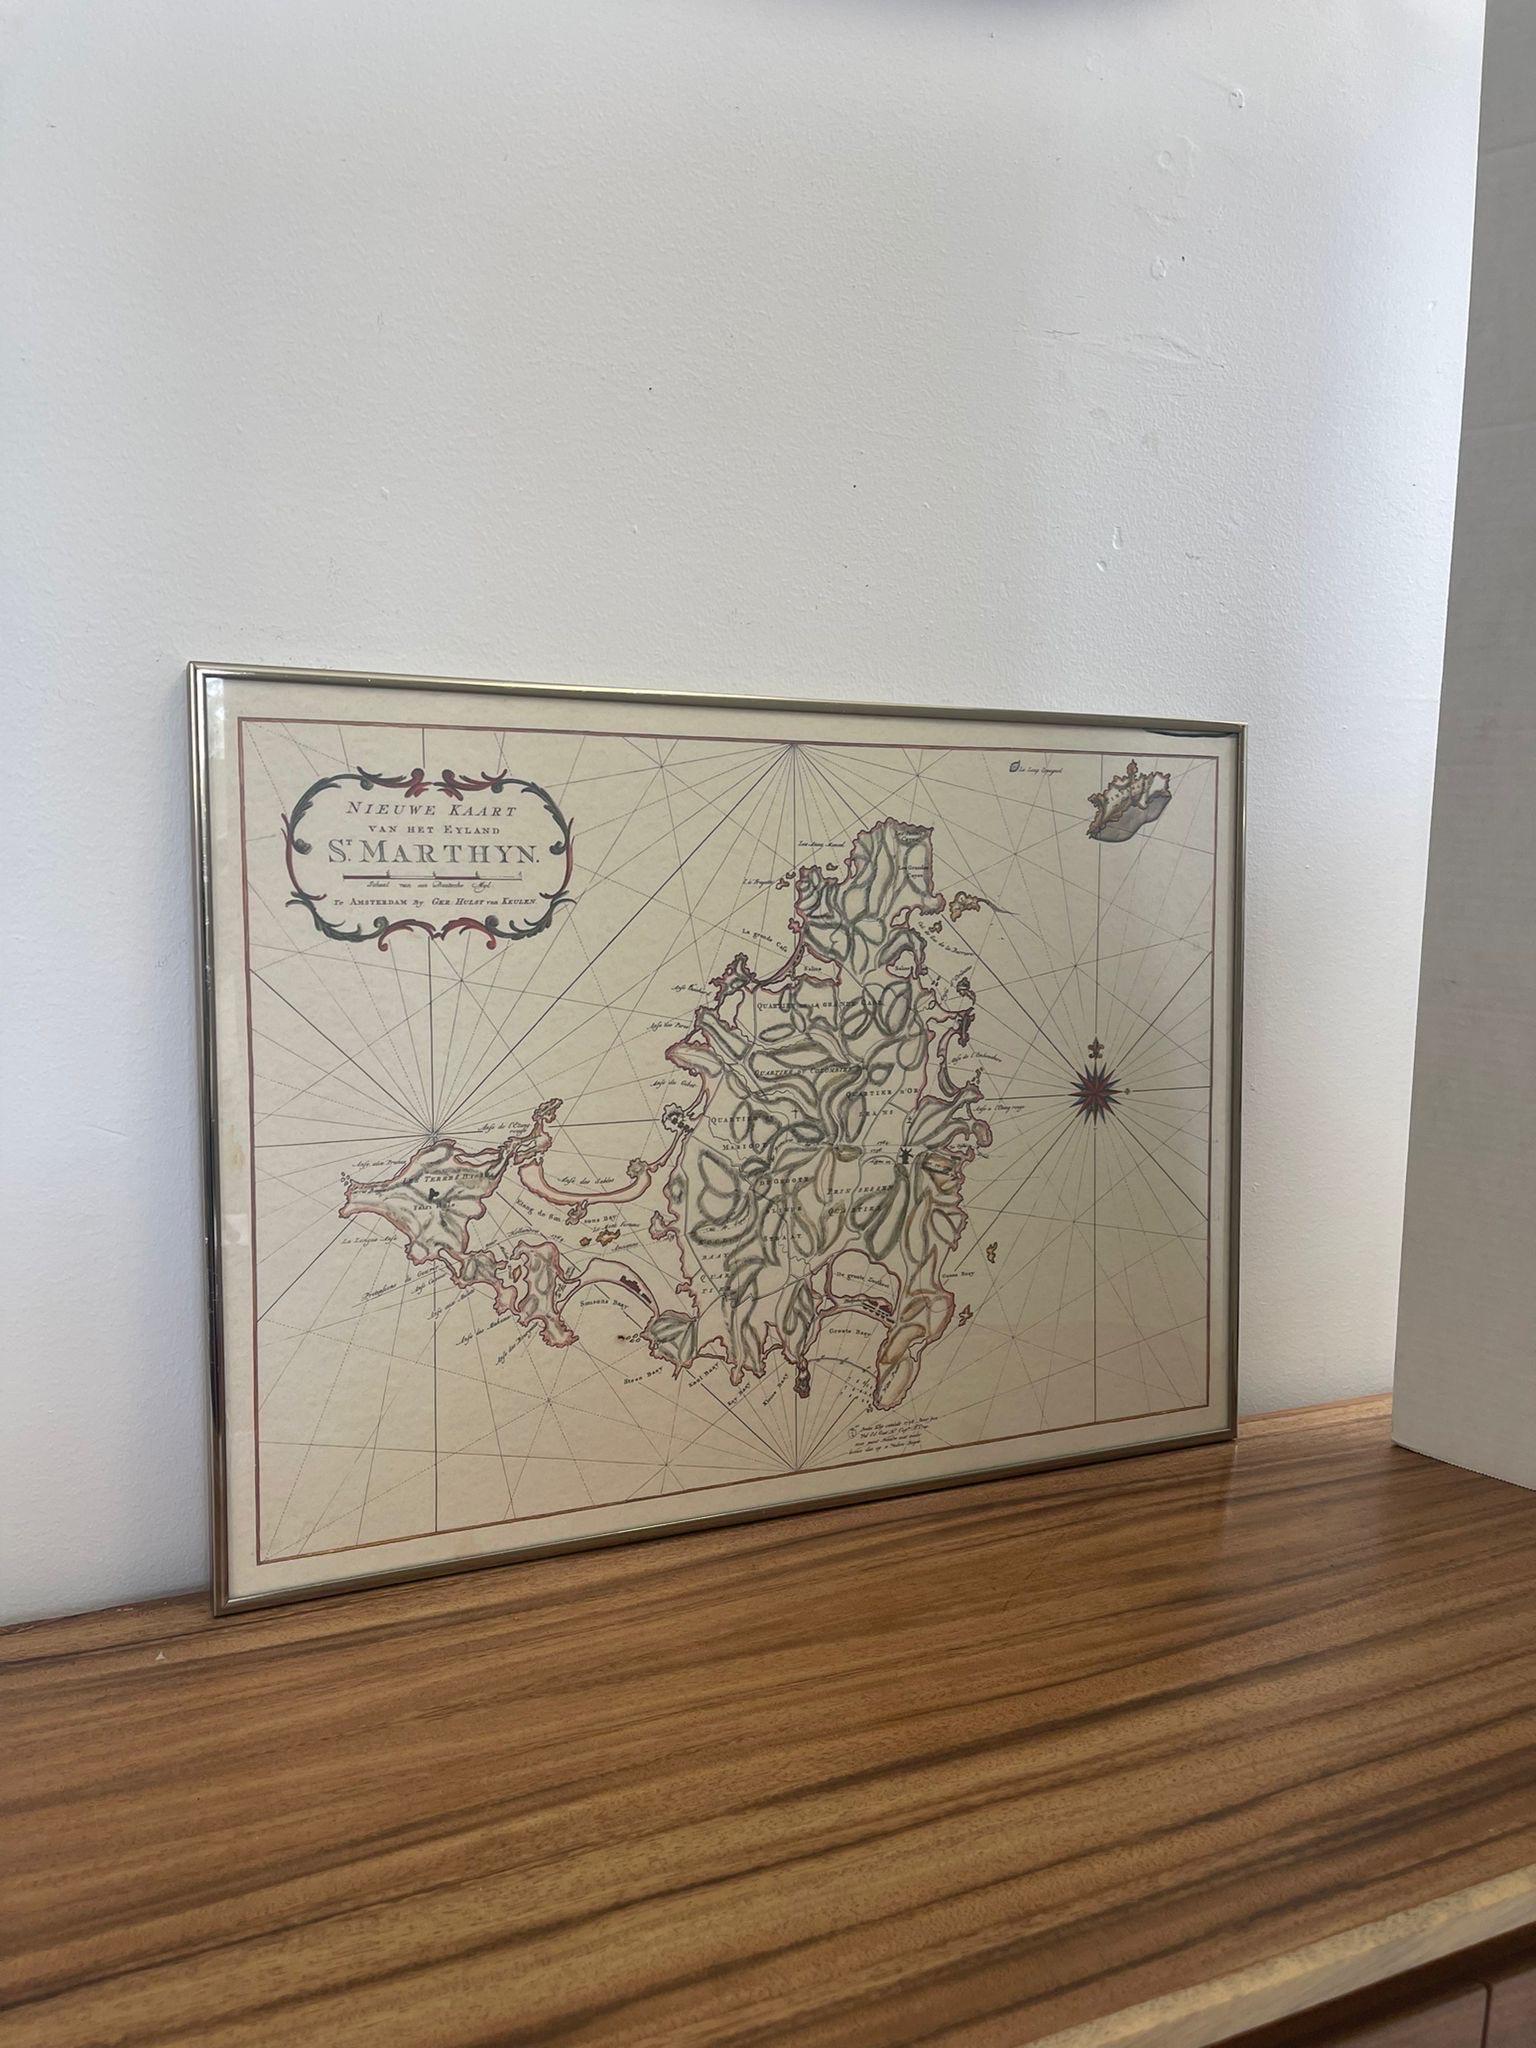 The Saint Martin island was originally St.Marthyn to the Dutch. This is a map of the island and surrounding area. Framed within silver toned professional framing. Vintage Condition Consistent with Age as Pictured.

Dimensions. 24 W ; 1/2 D ; 18 H